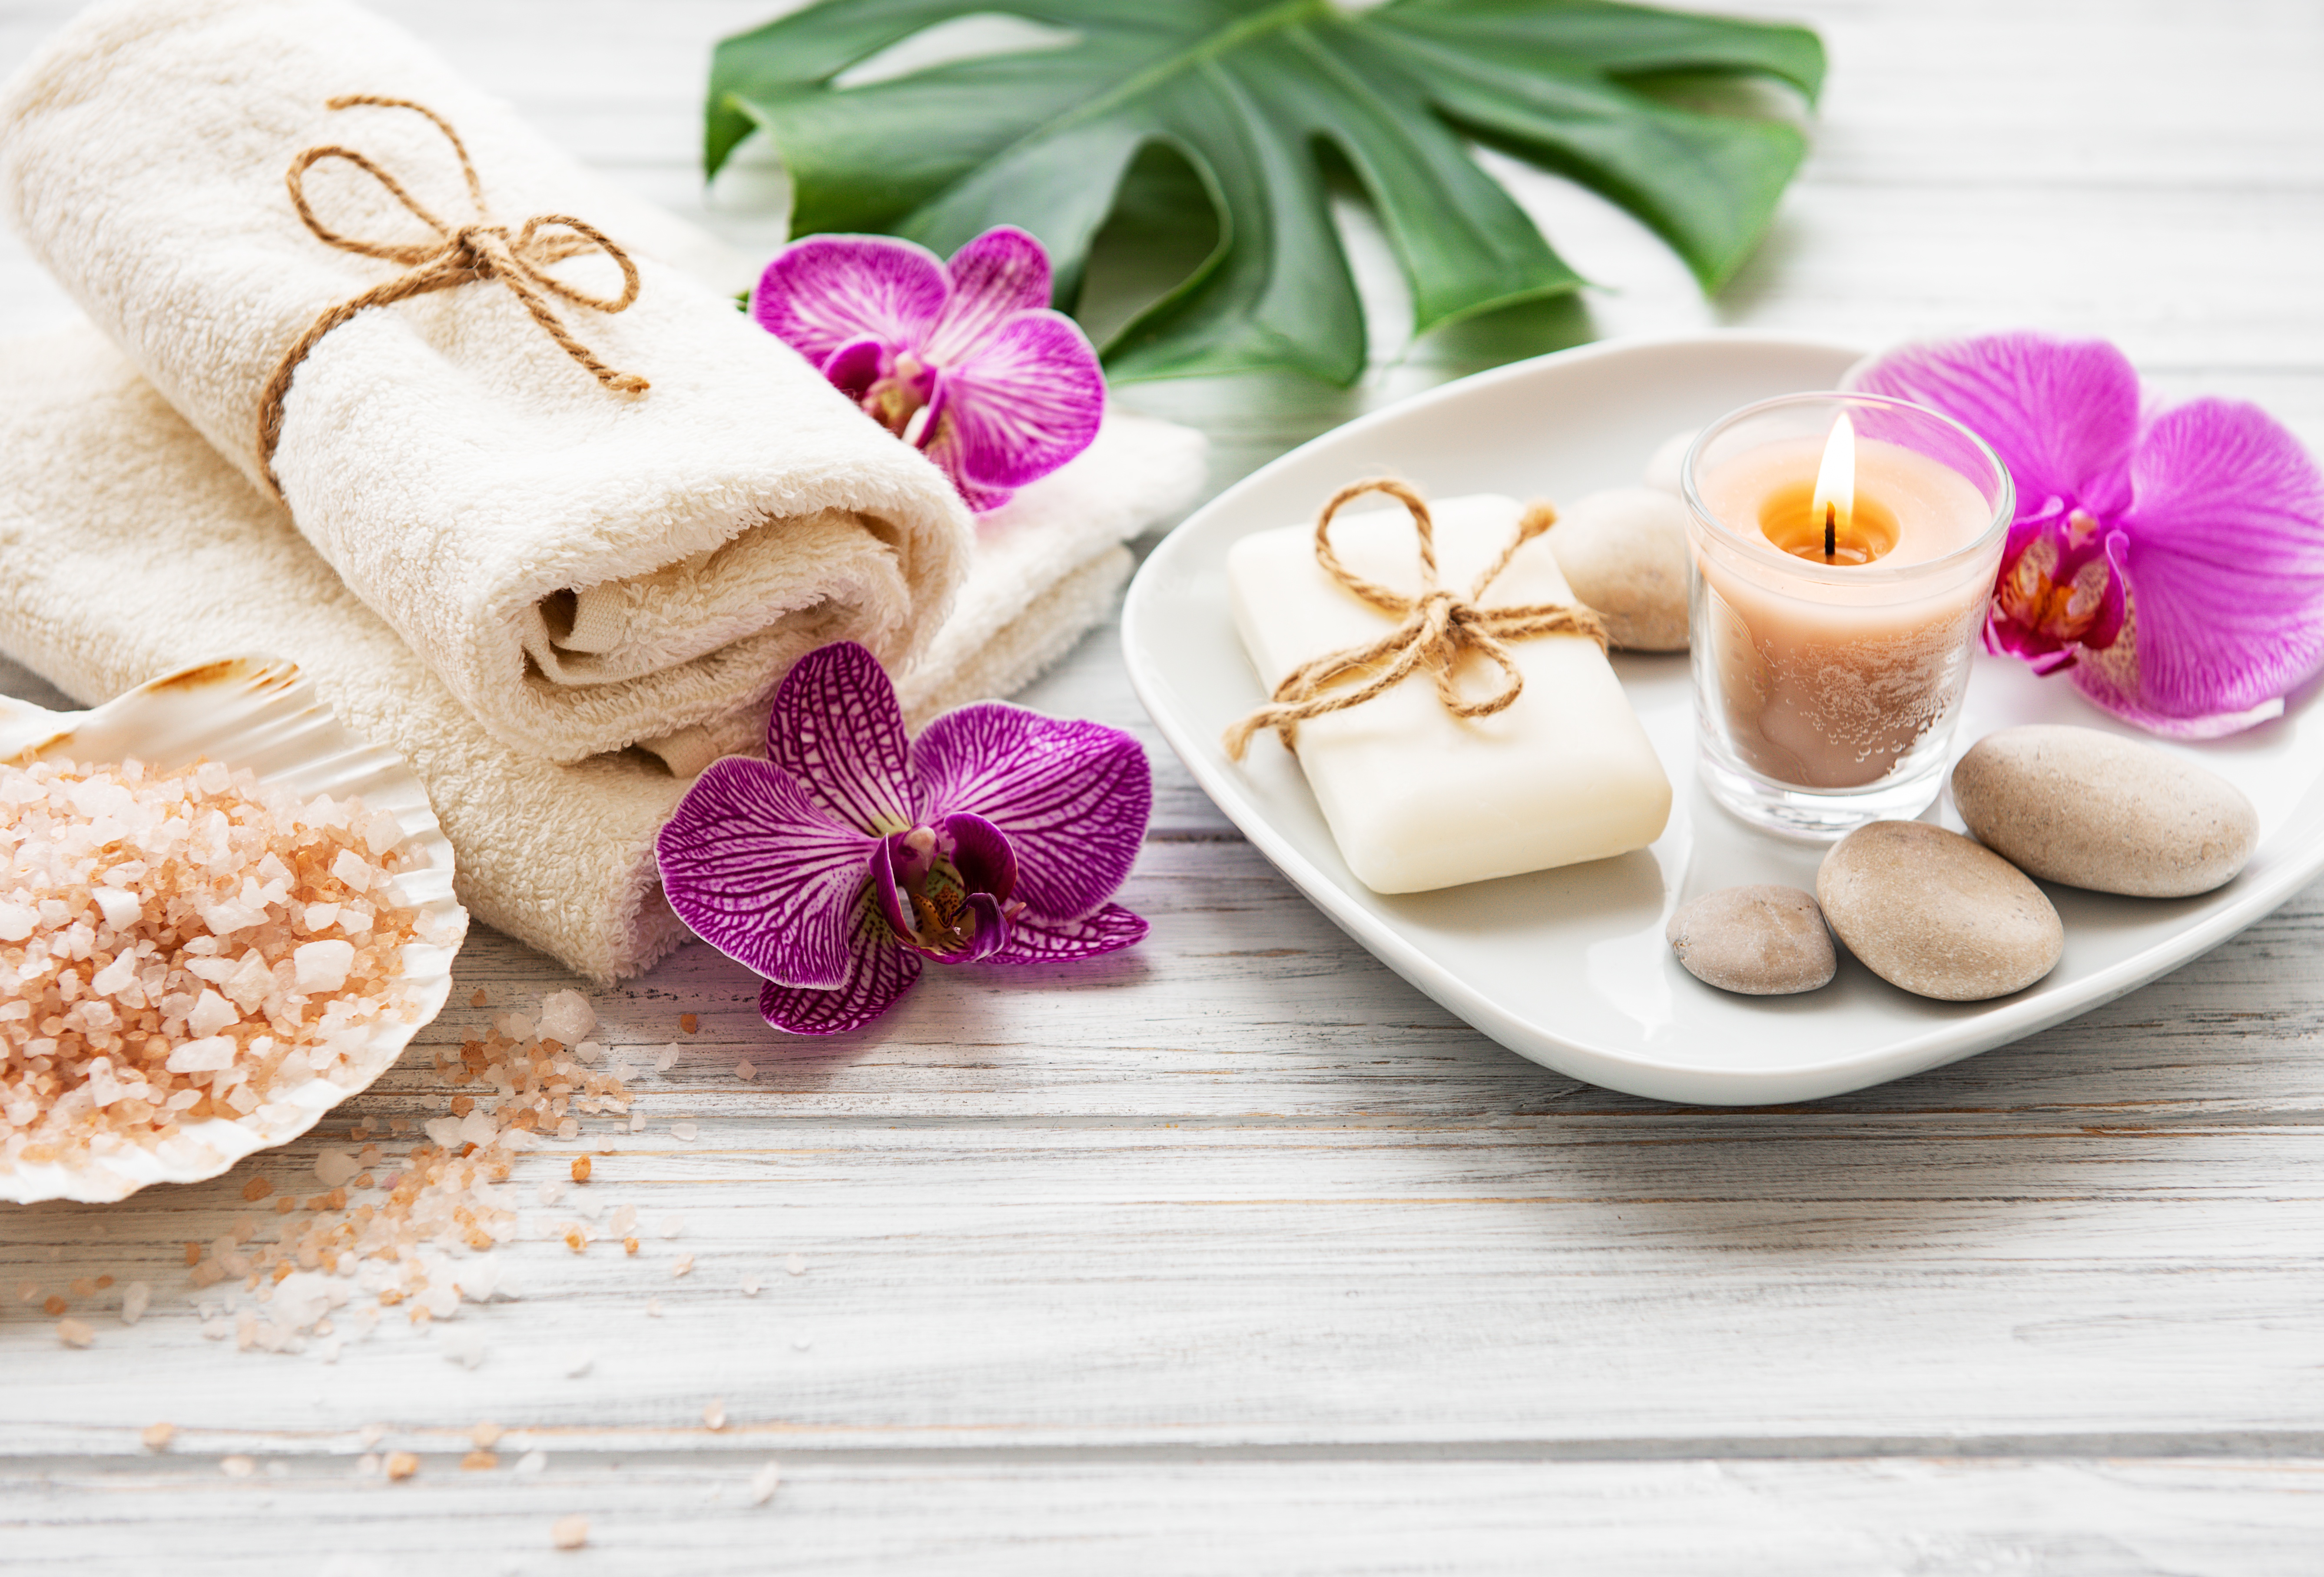 man made, spa, candle, flower, orchid, towel, zen